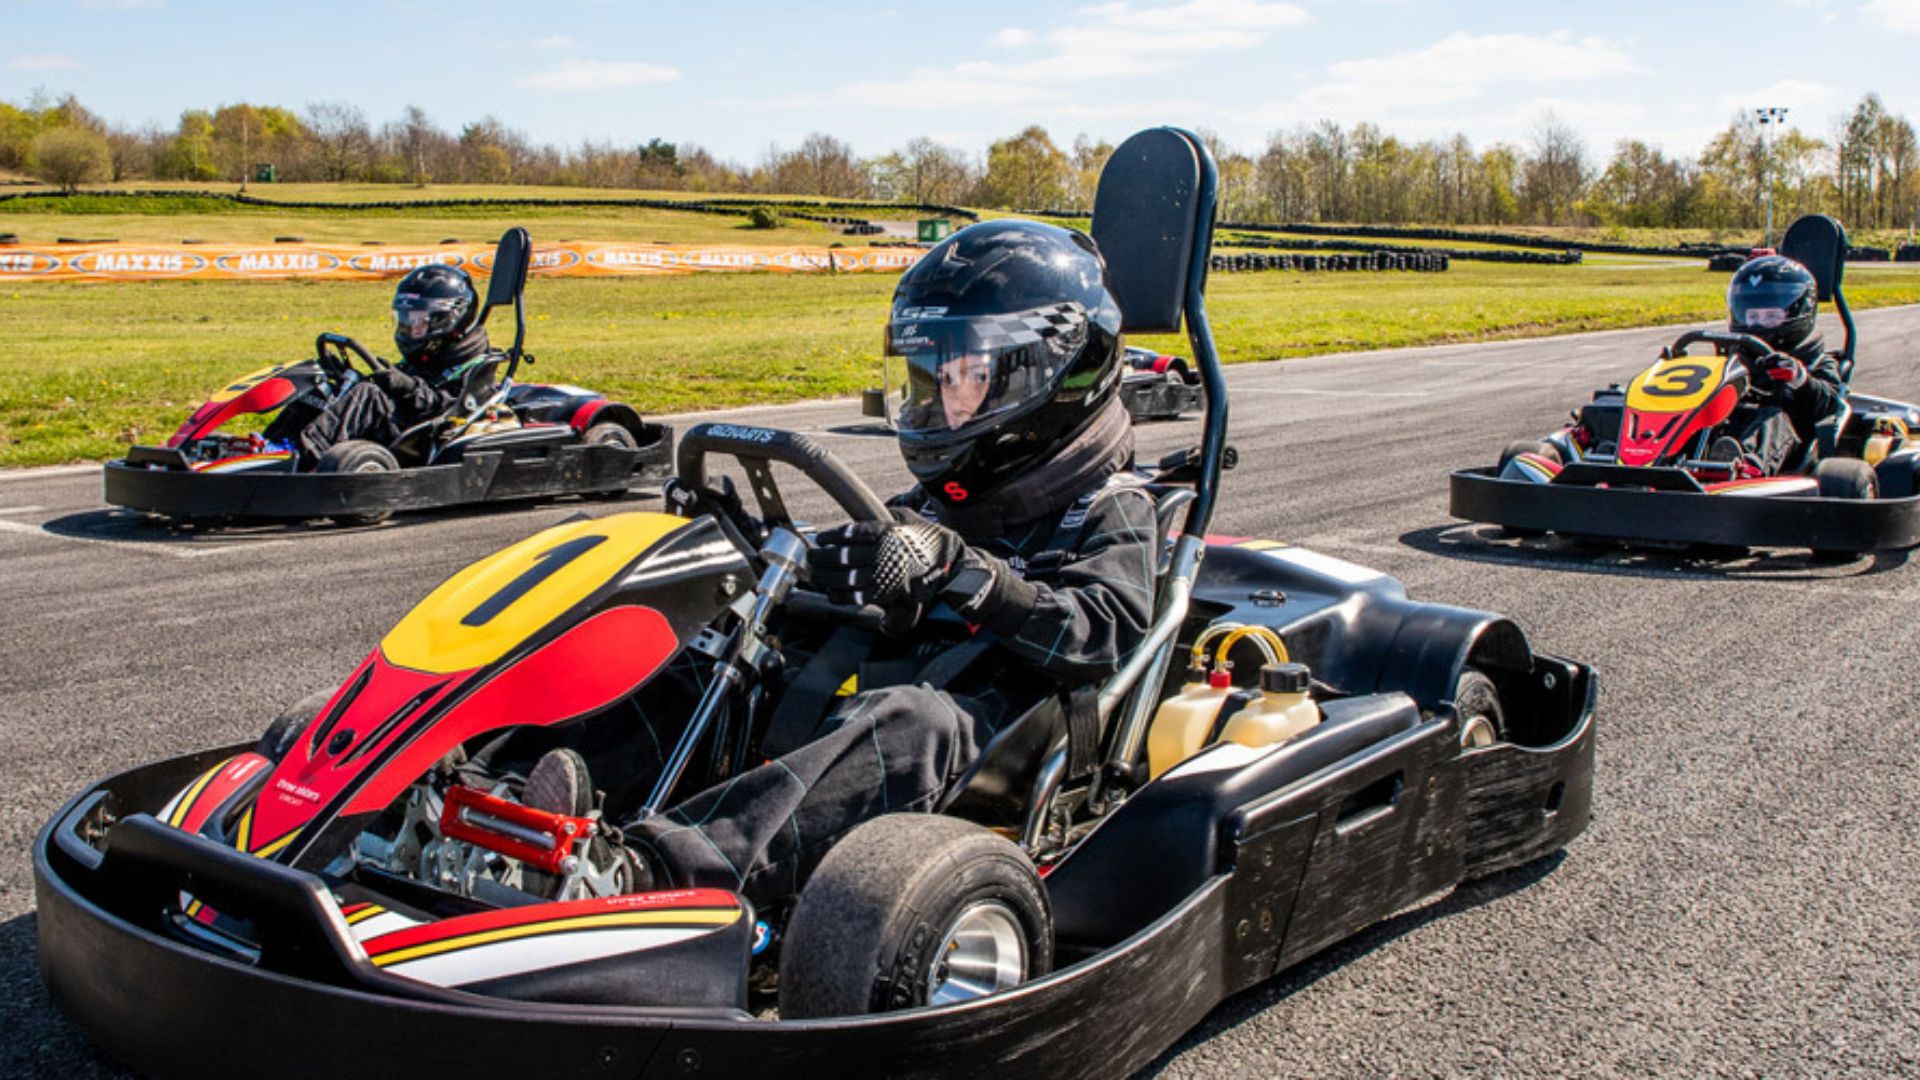 A Guide to the Different Classes of Kart Racing